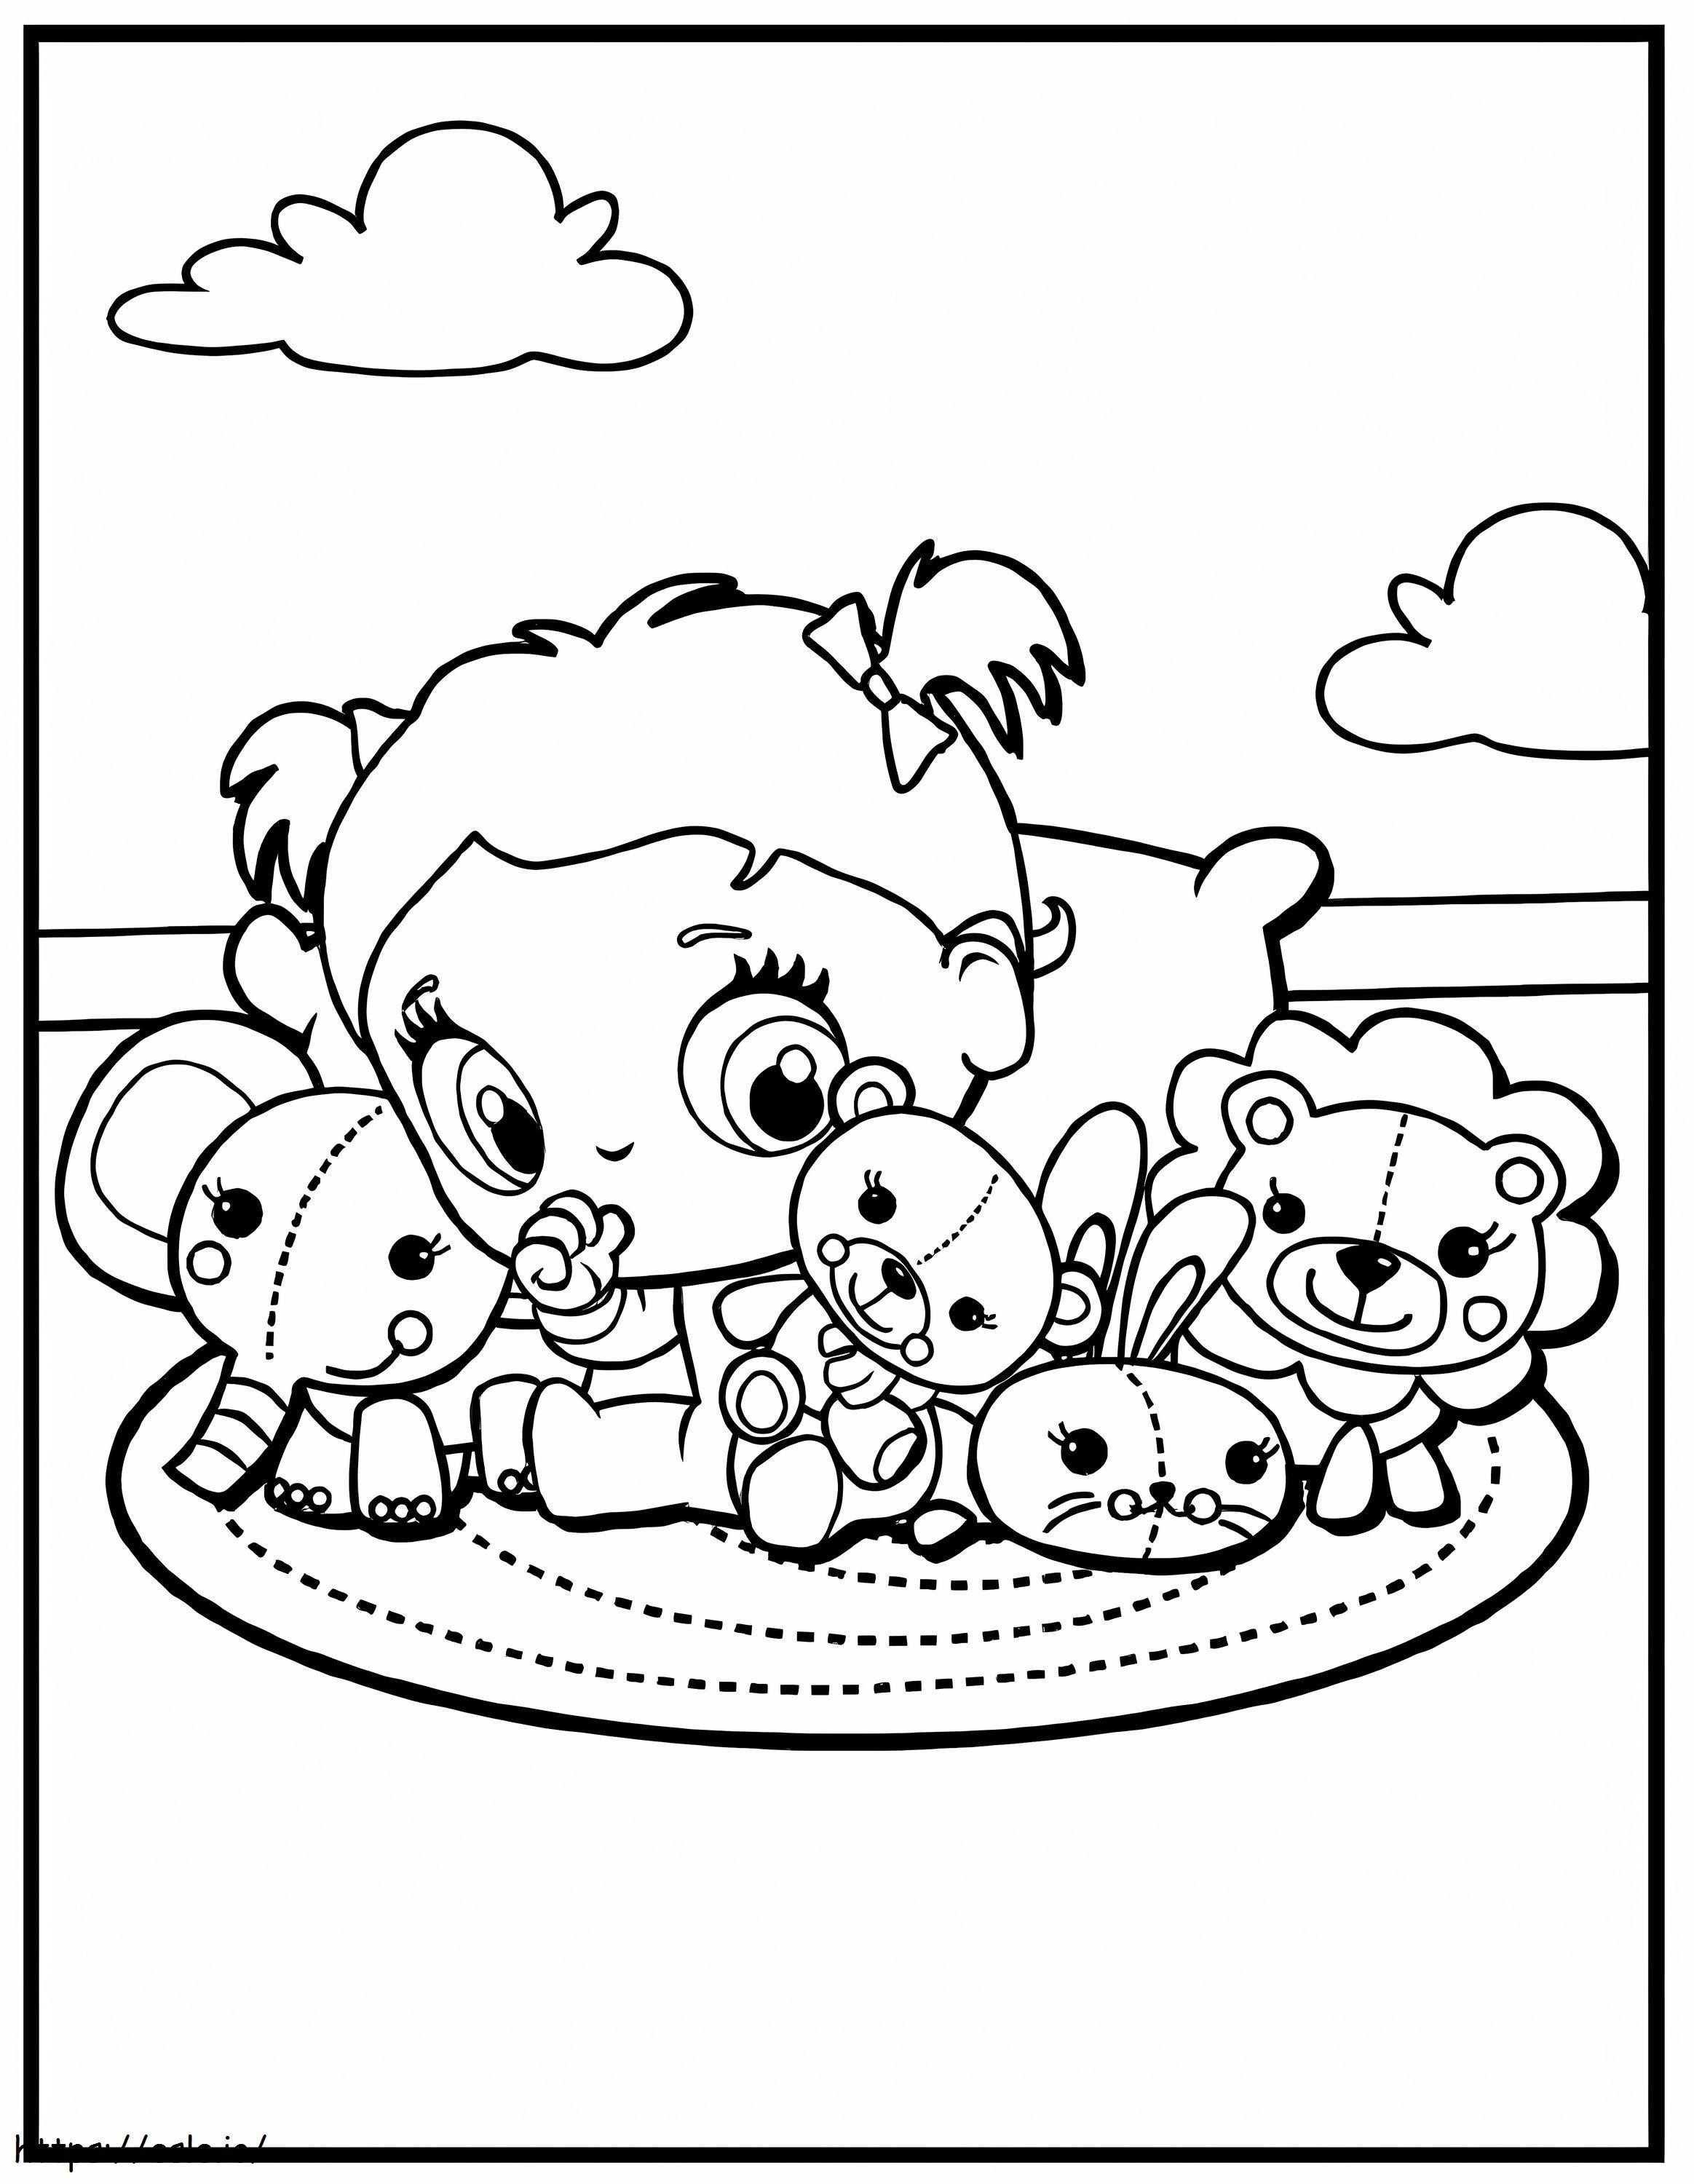 Cute Baby Alive coloring page